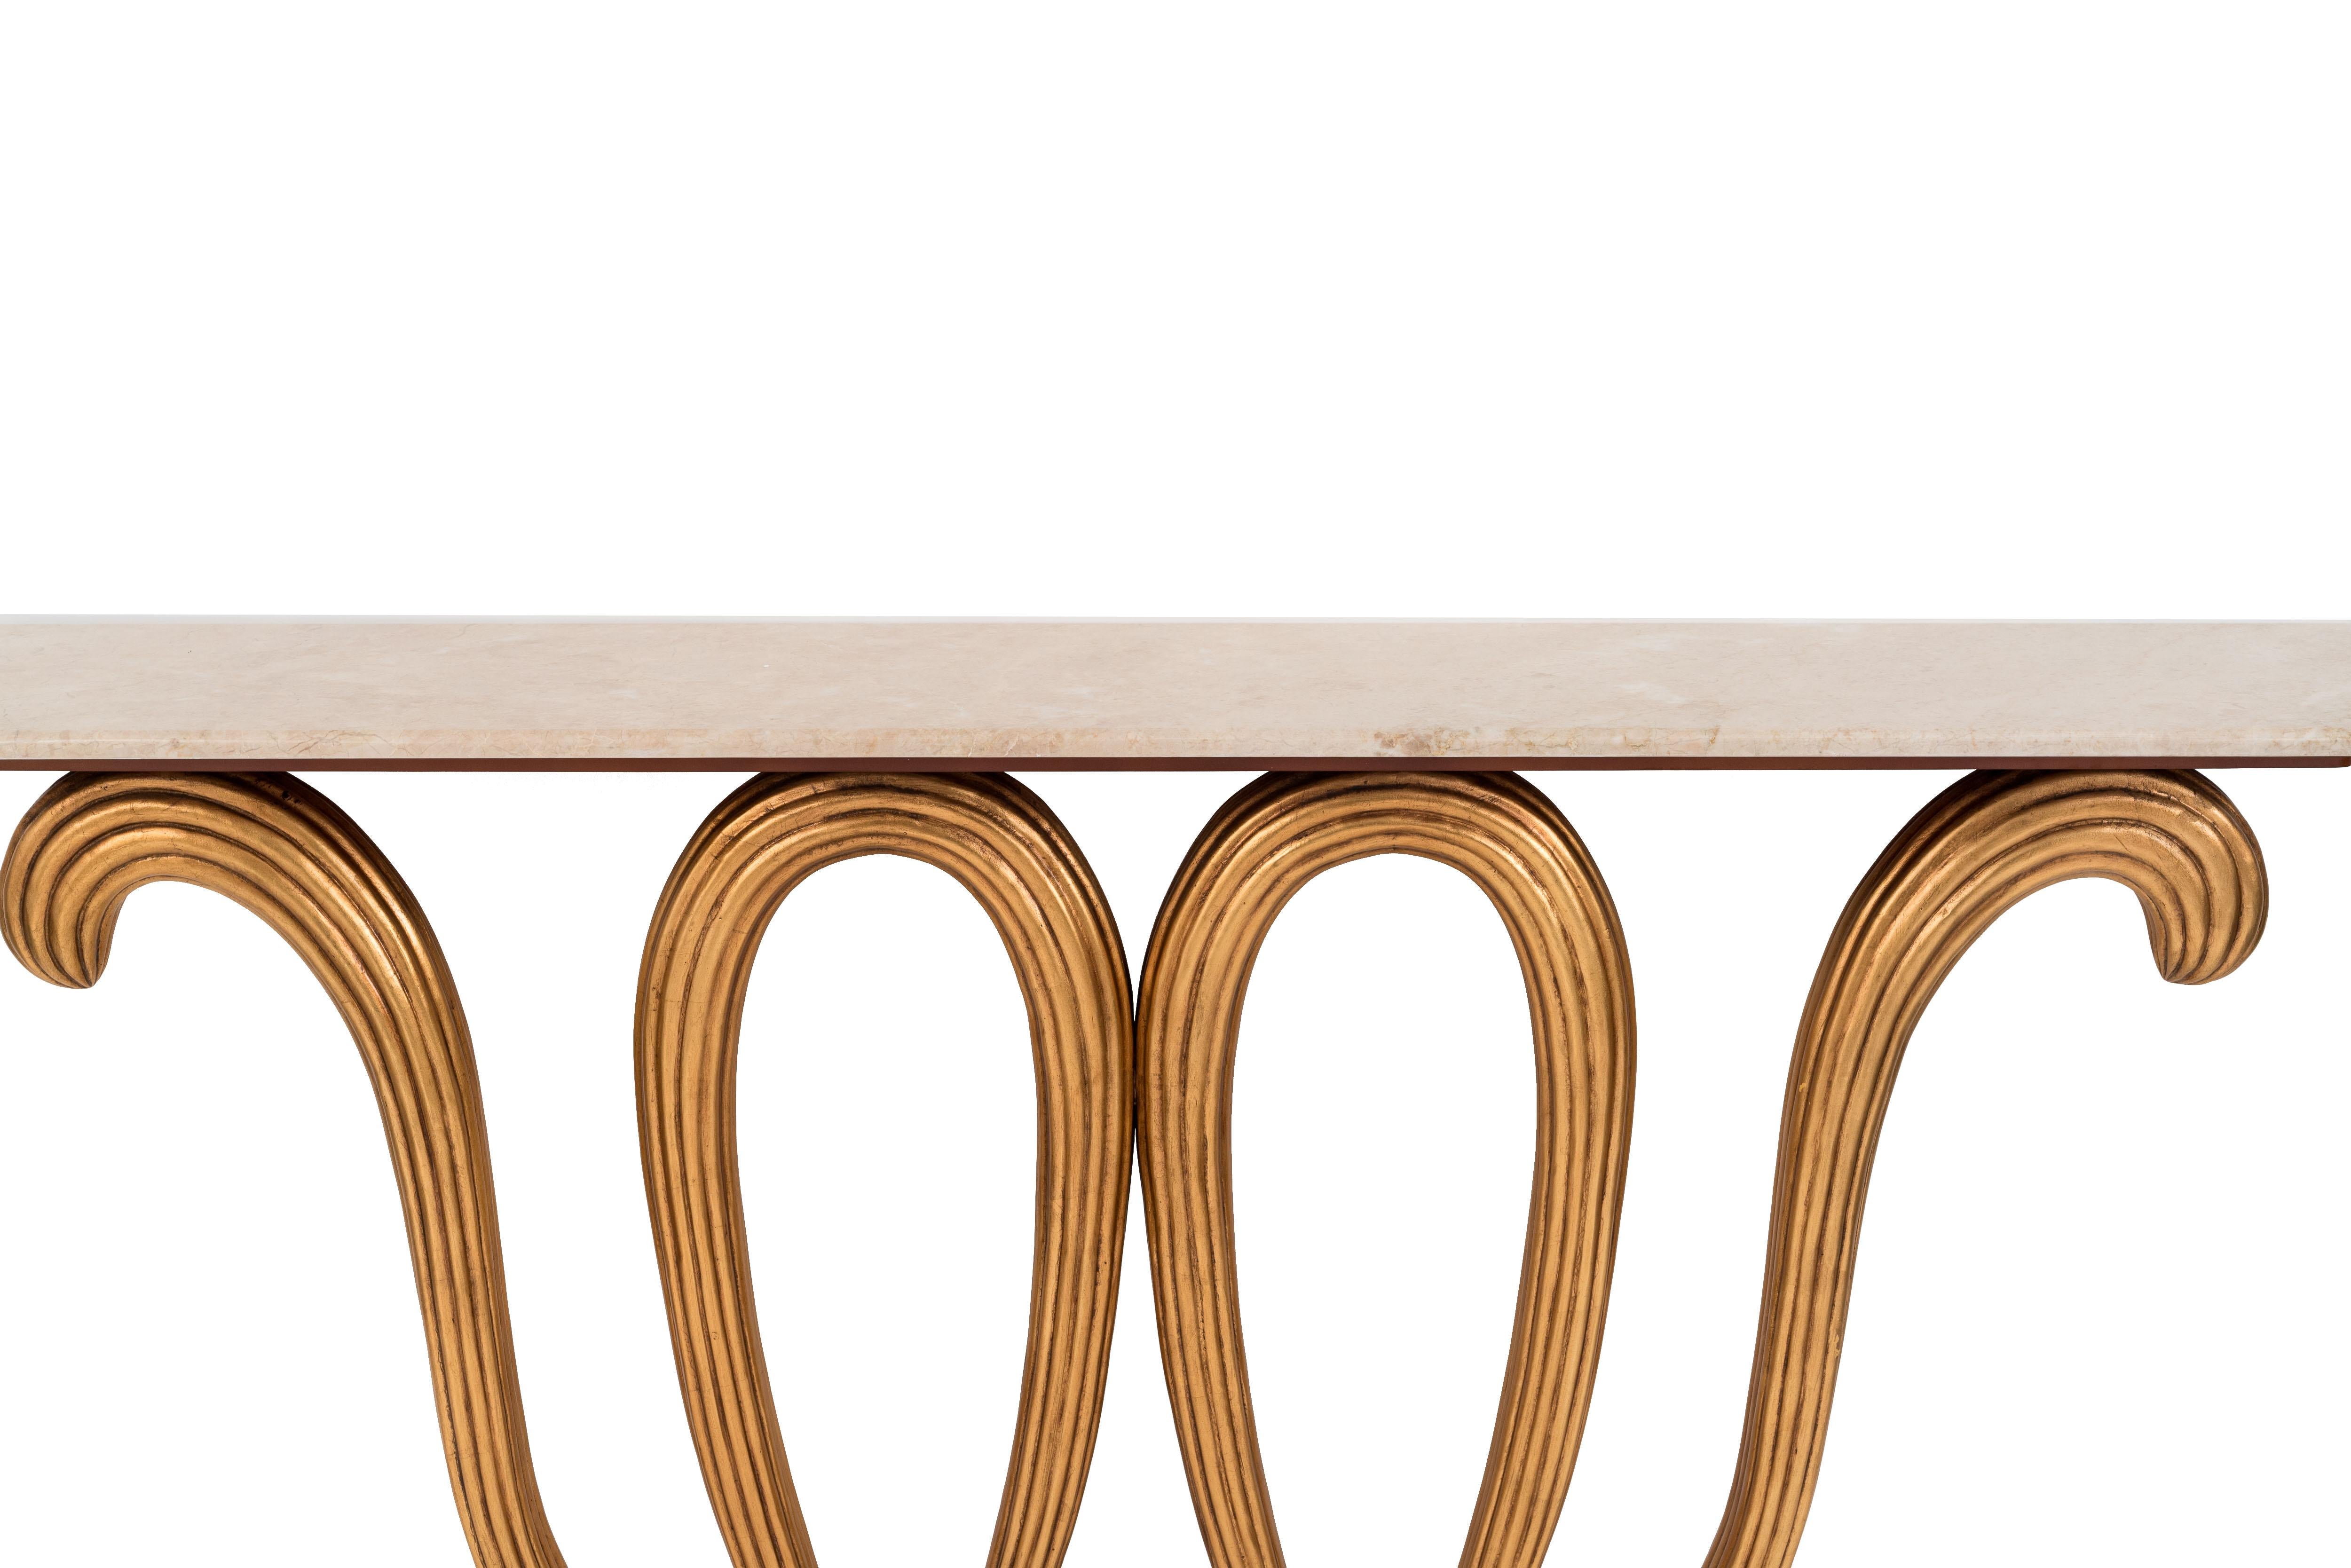 Inspired by the designer Borsani, the base is a carved and reeded series of loops, which support the Crema Marfil marble top. The console table is not freestanding and must be secured to the wall. Not freestanding, must be bolted to wall. (John